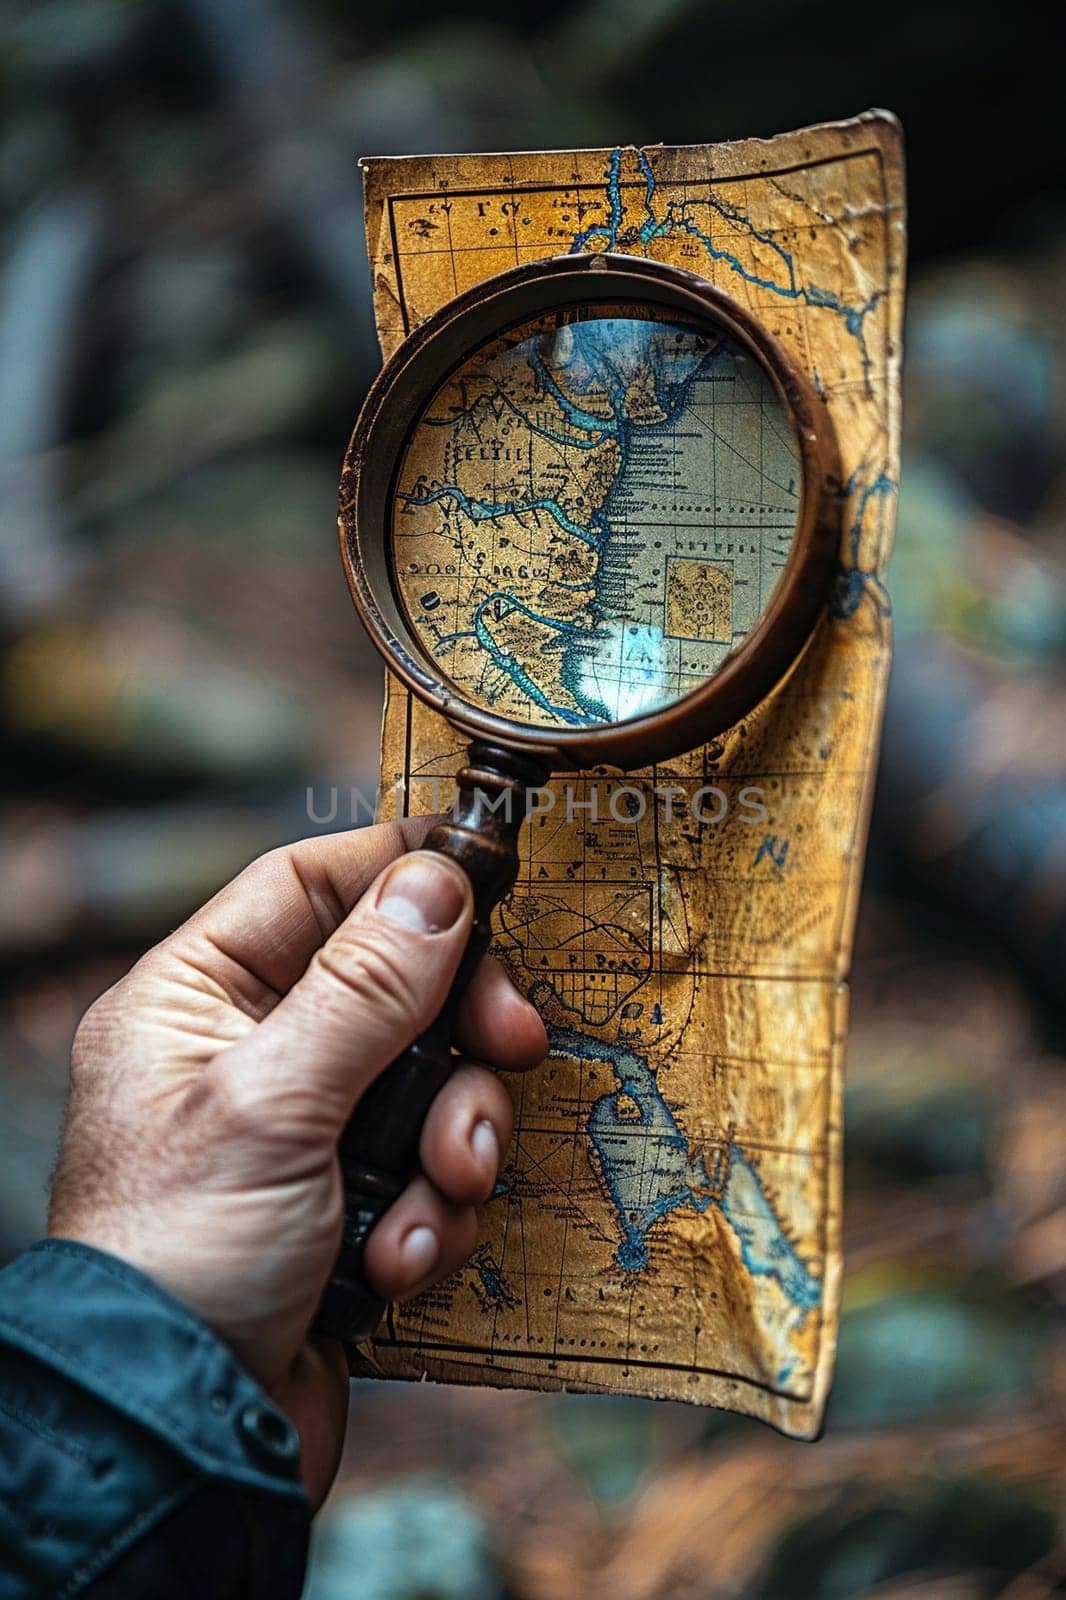 Hand holding a magnifying glass over a map, symbolizing exploration and discovery.